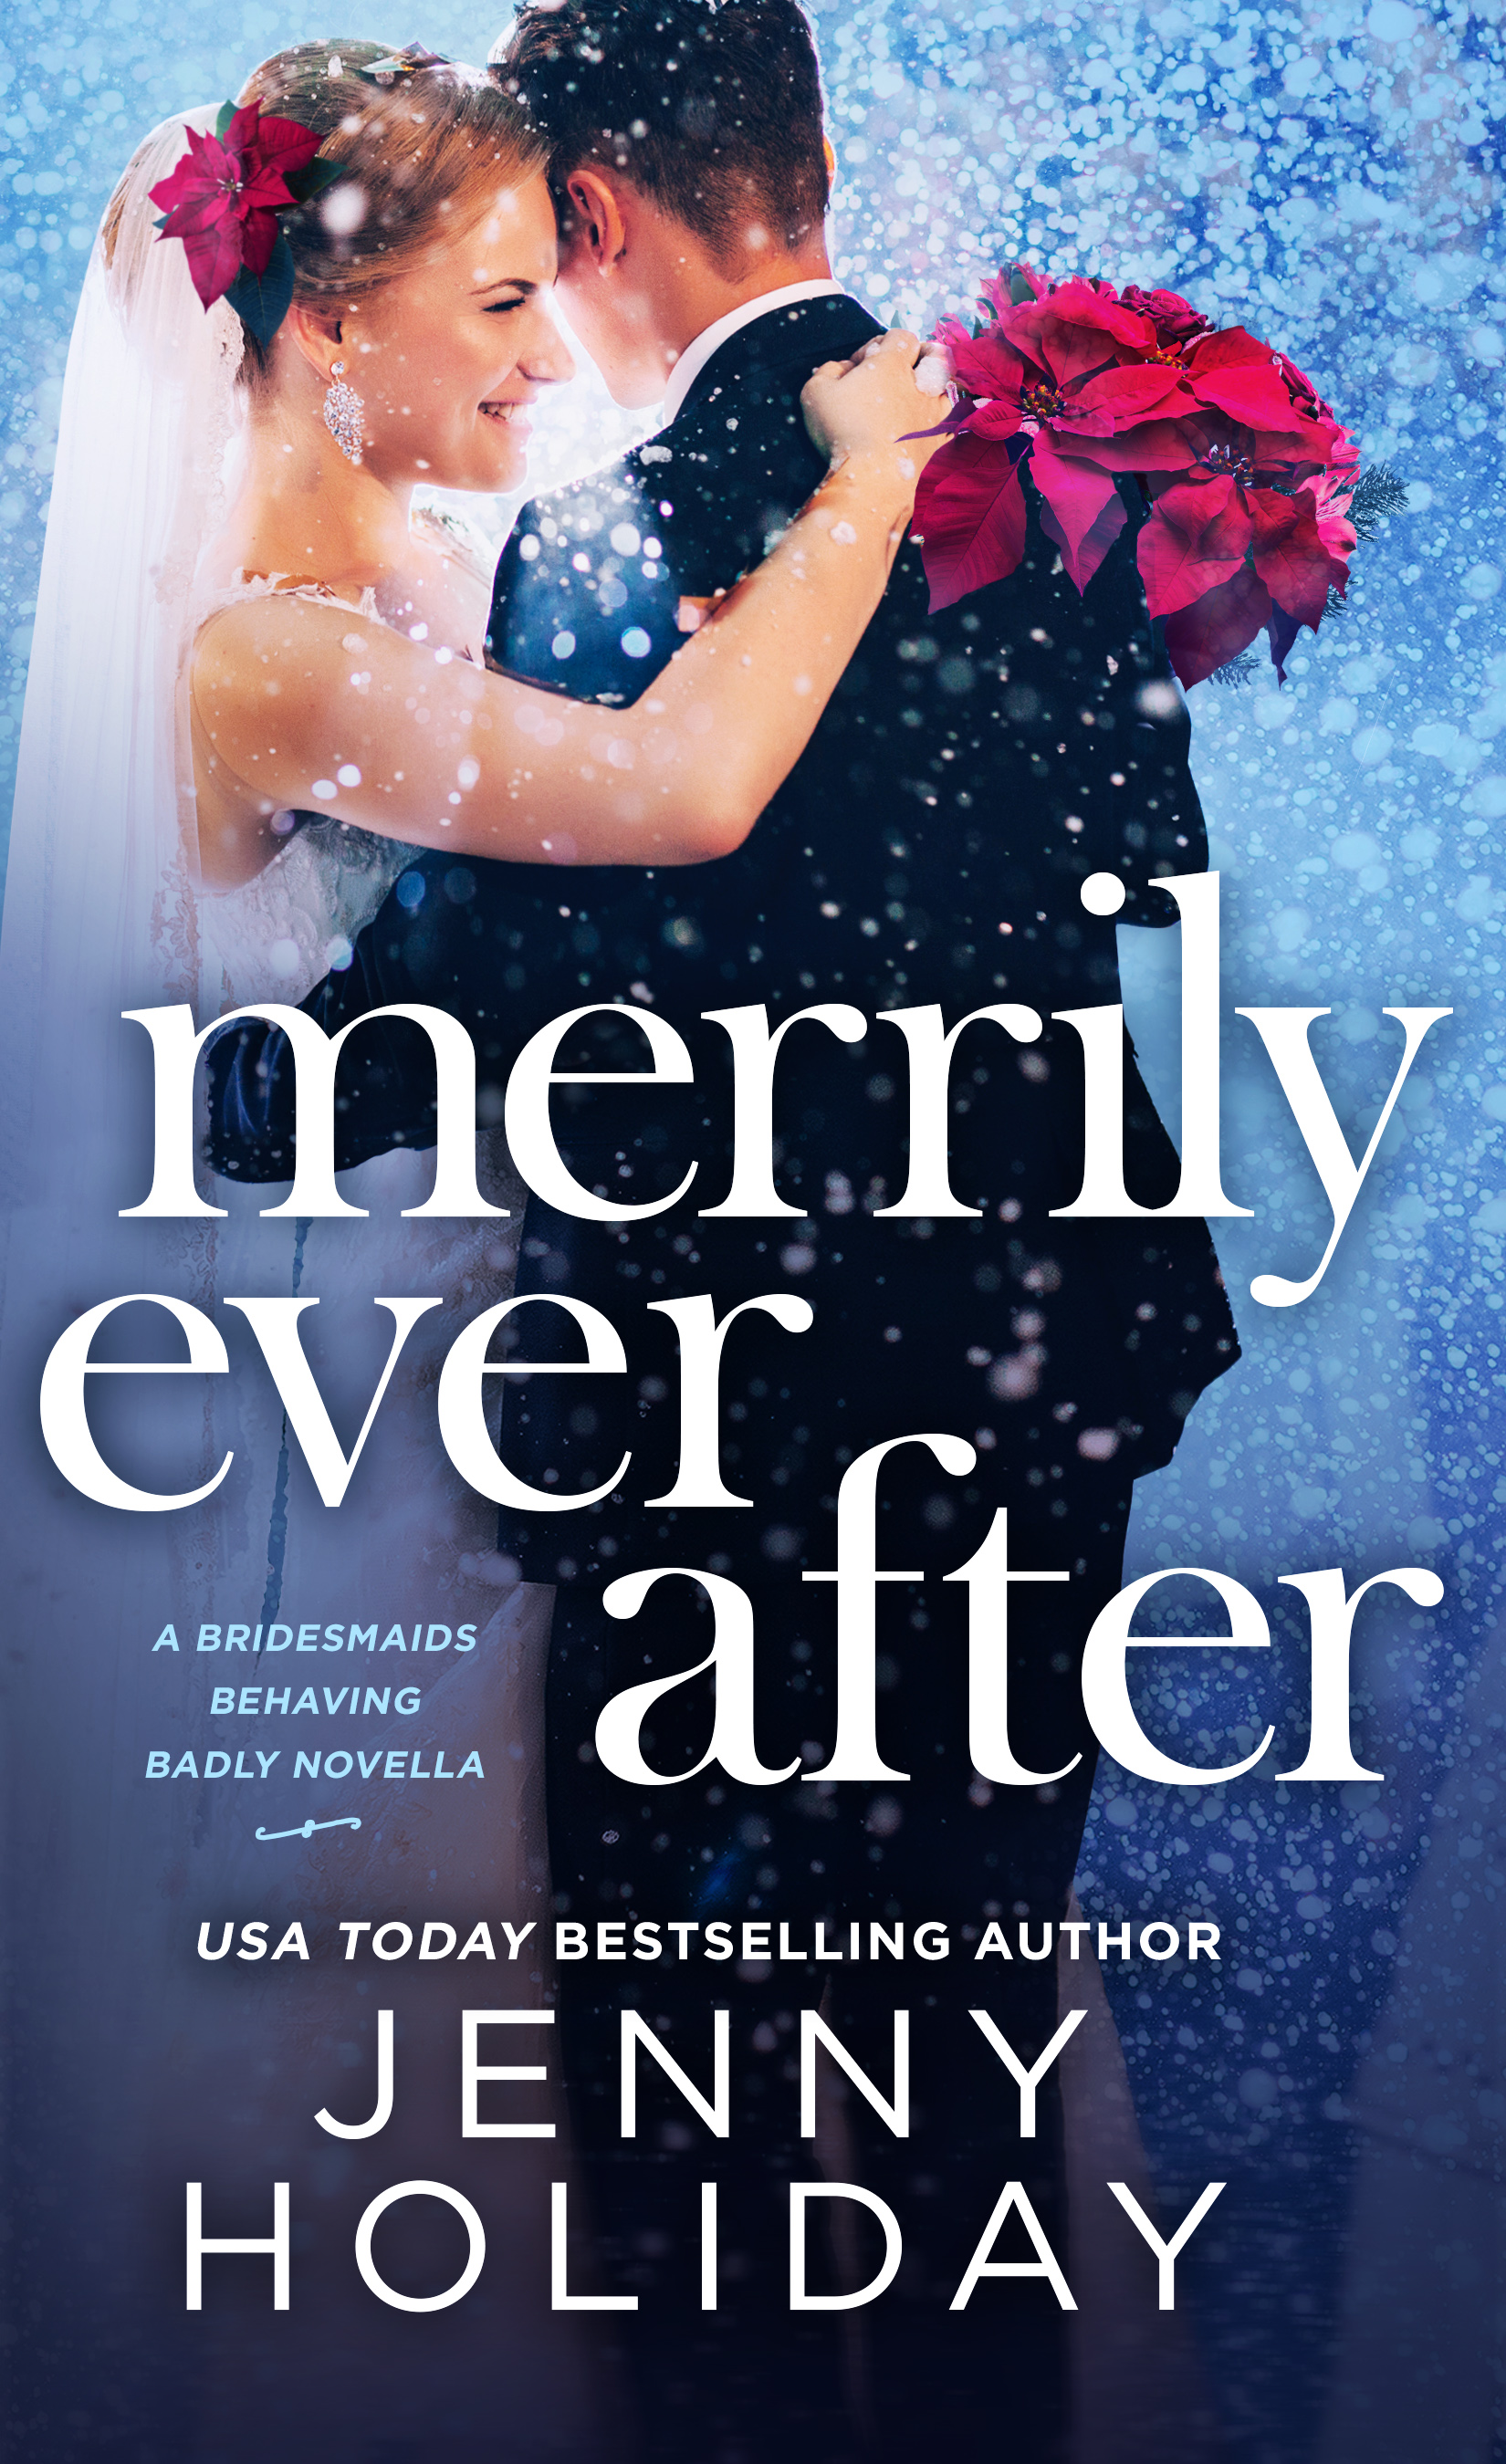 Merrily Ever After